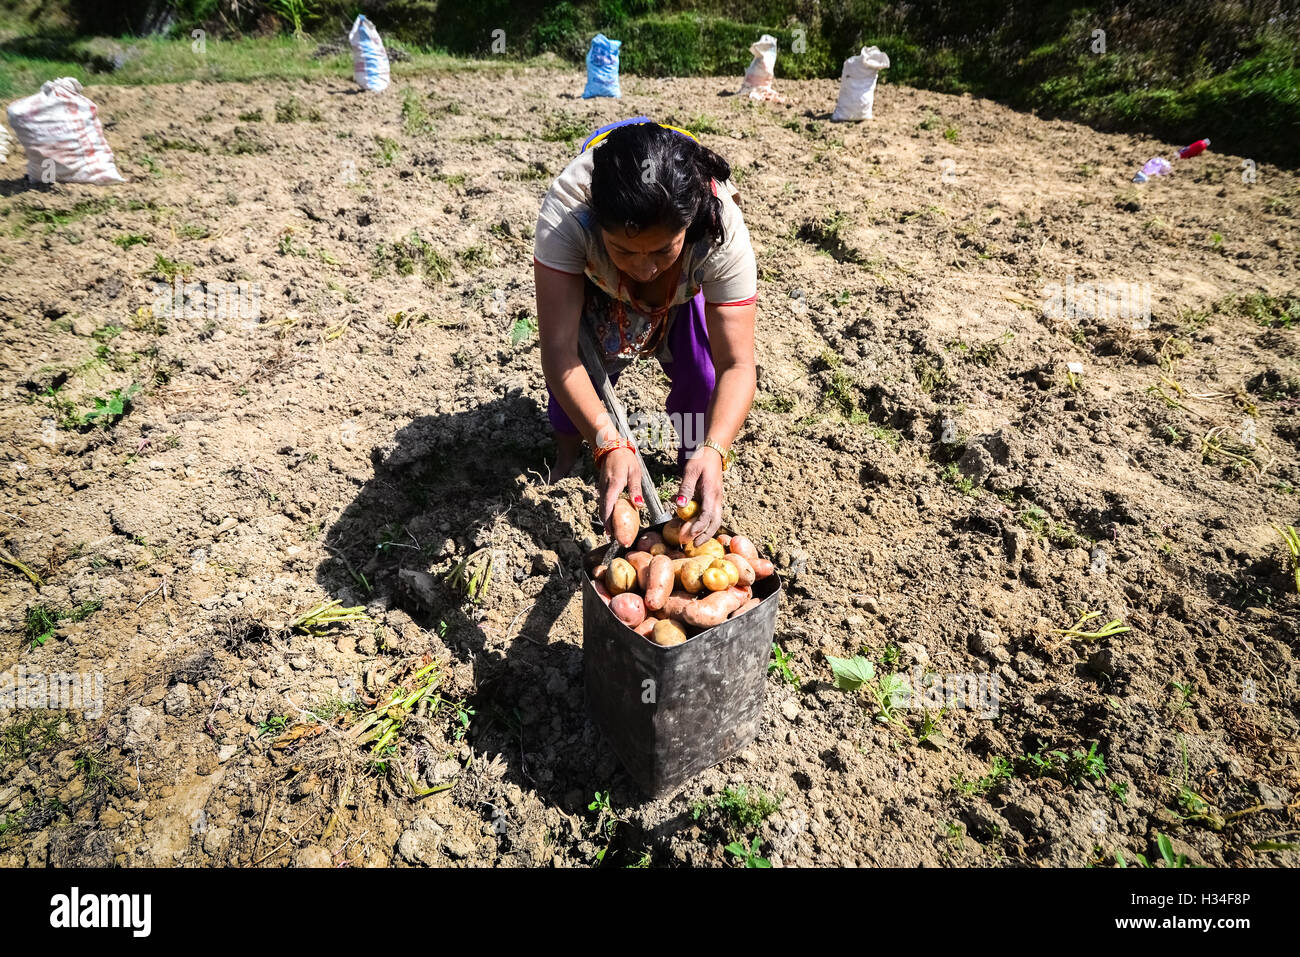 A woman farmer harvesting potato in a rural area on the outskirts of Bhaktapur, Nepal. Stock Photo